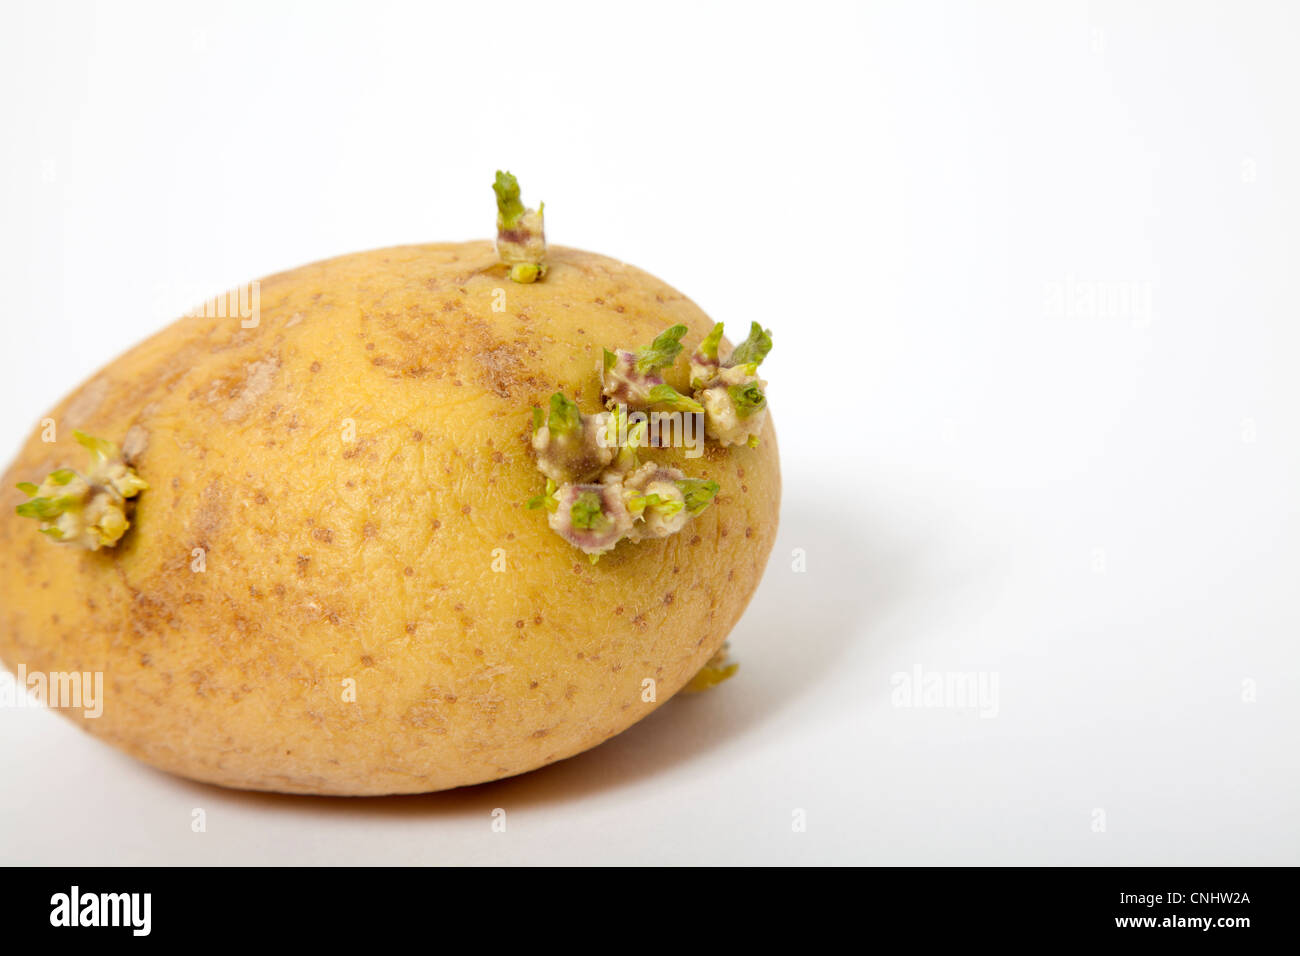 Old Potato with green sprouts Stock Photo